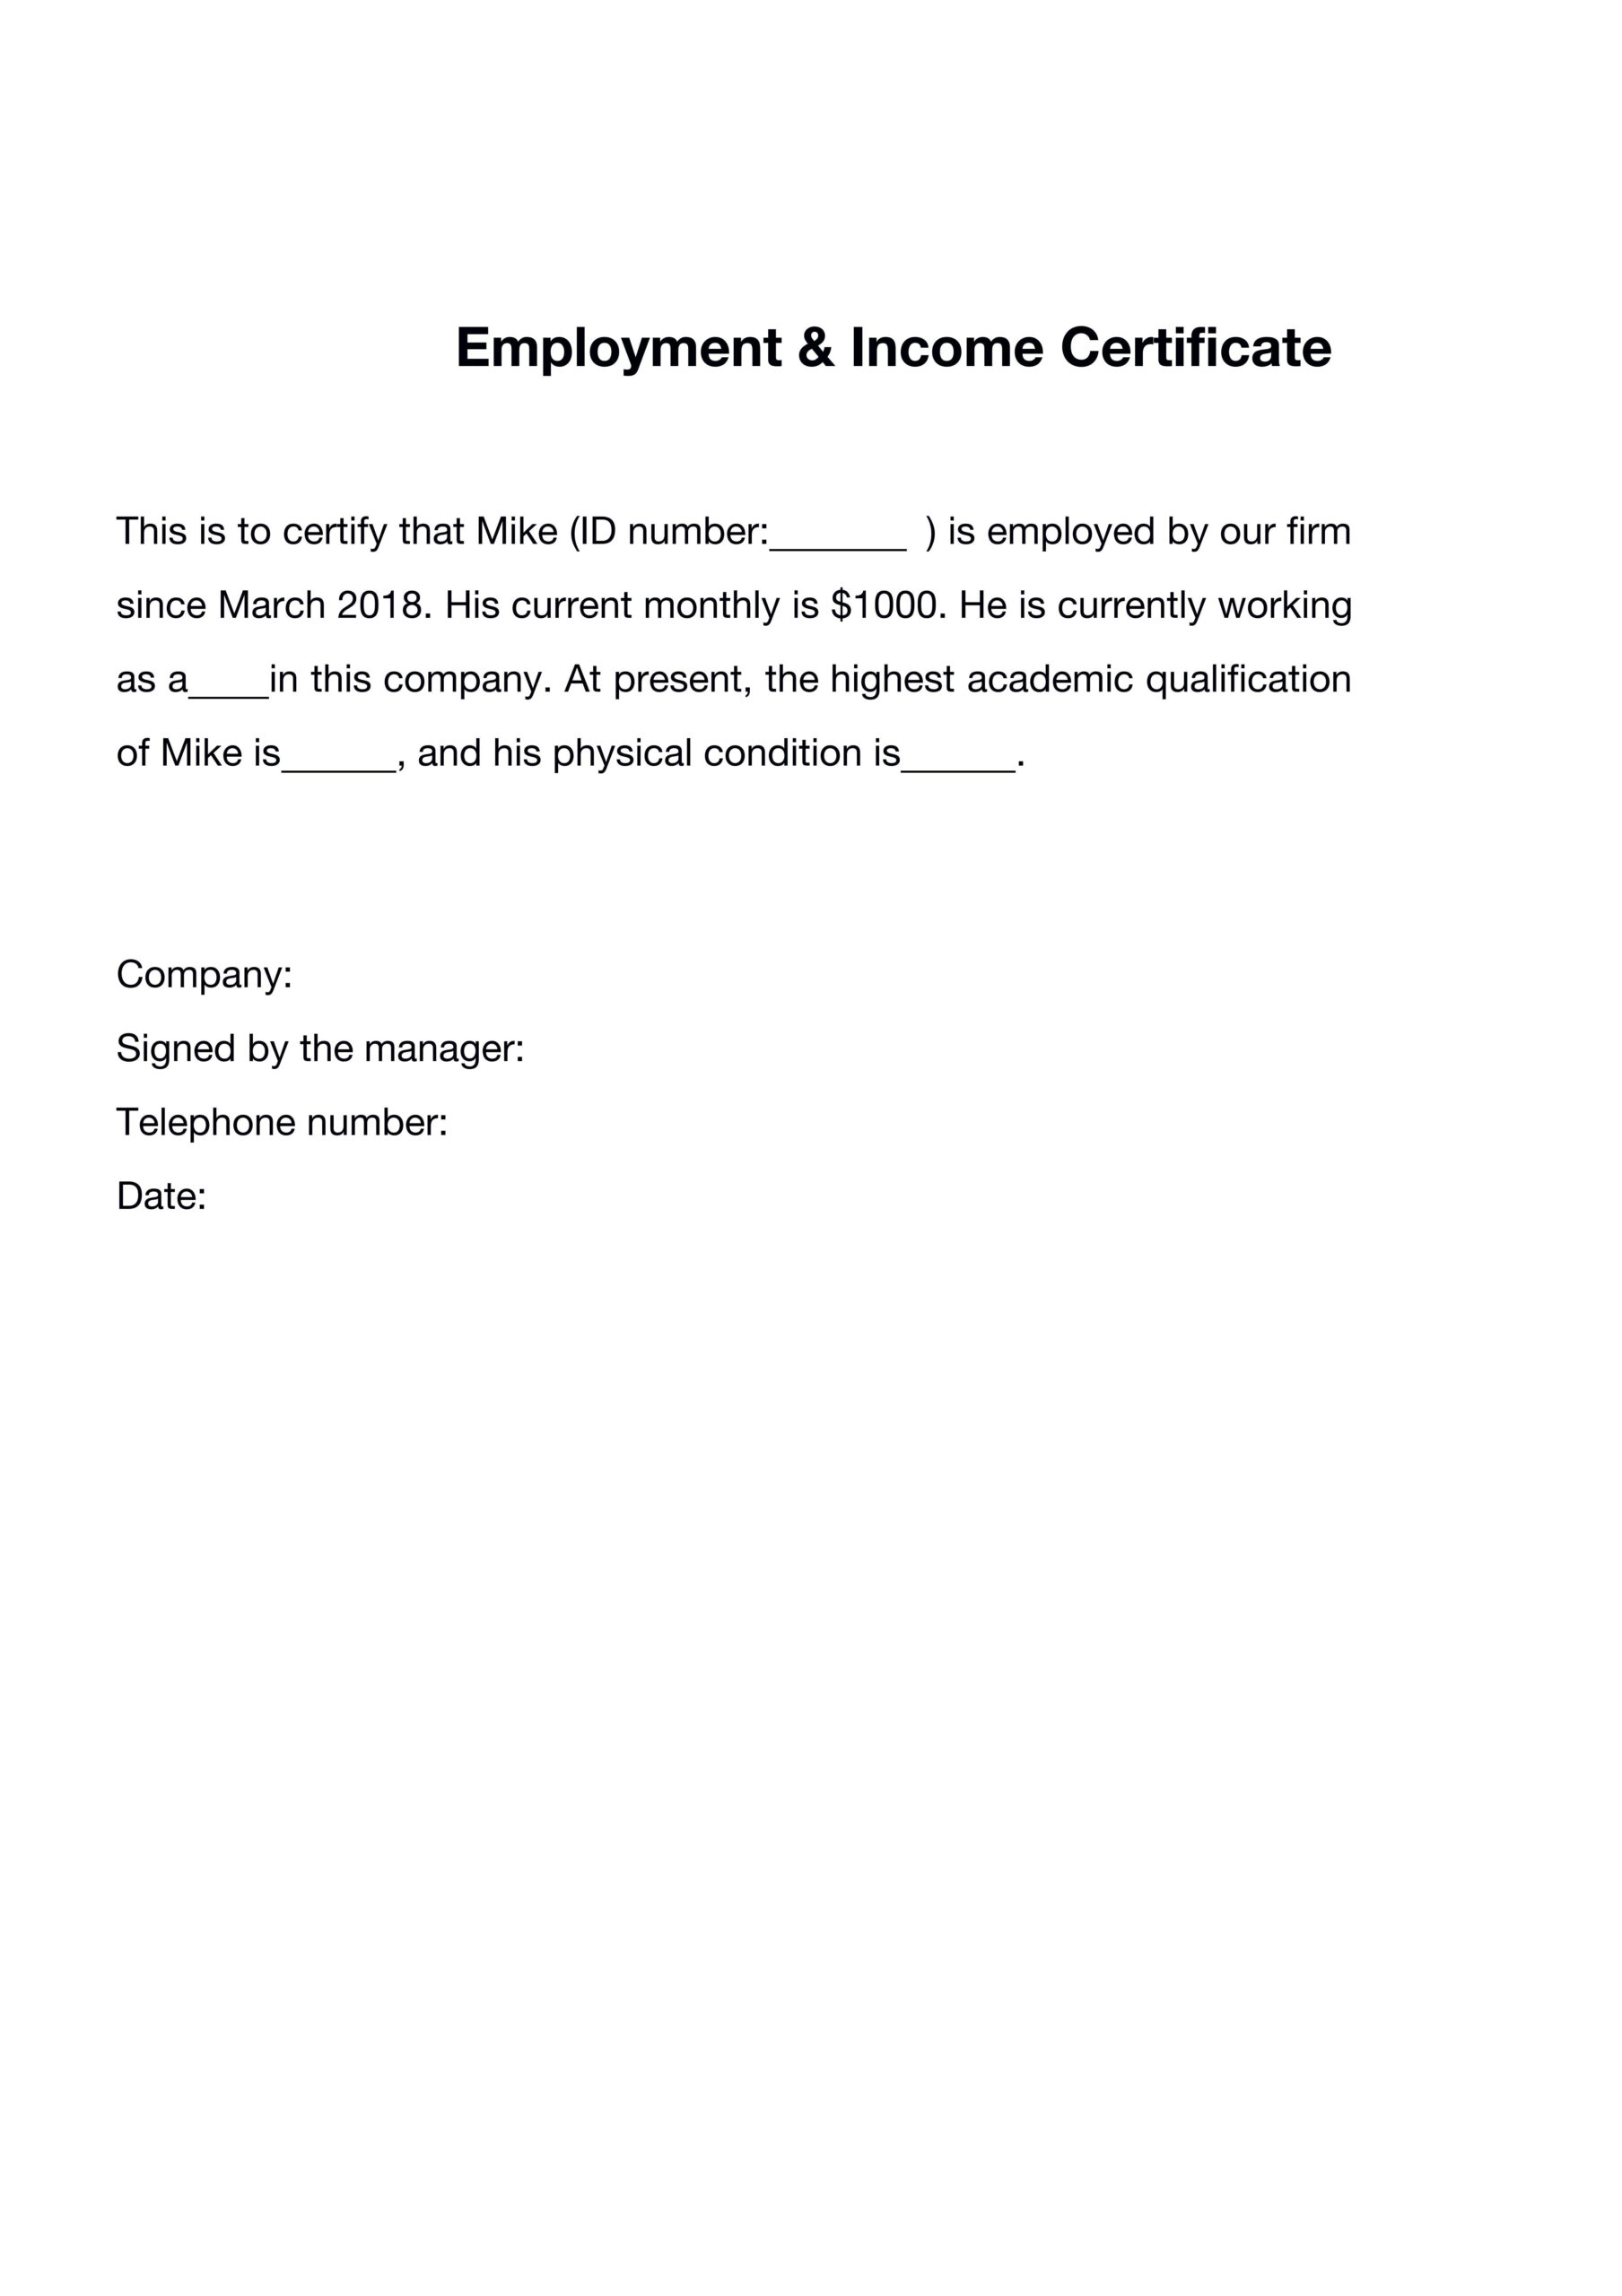 WORD of Employment & Income Certificate